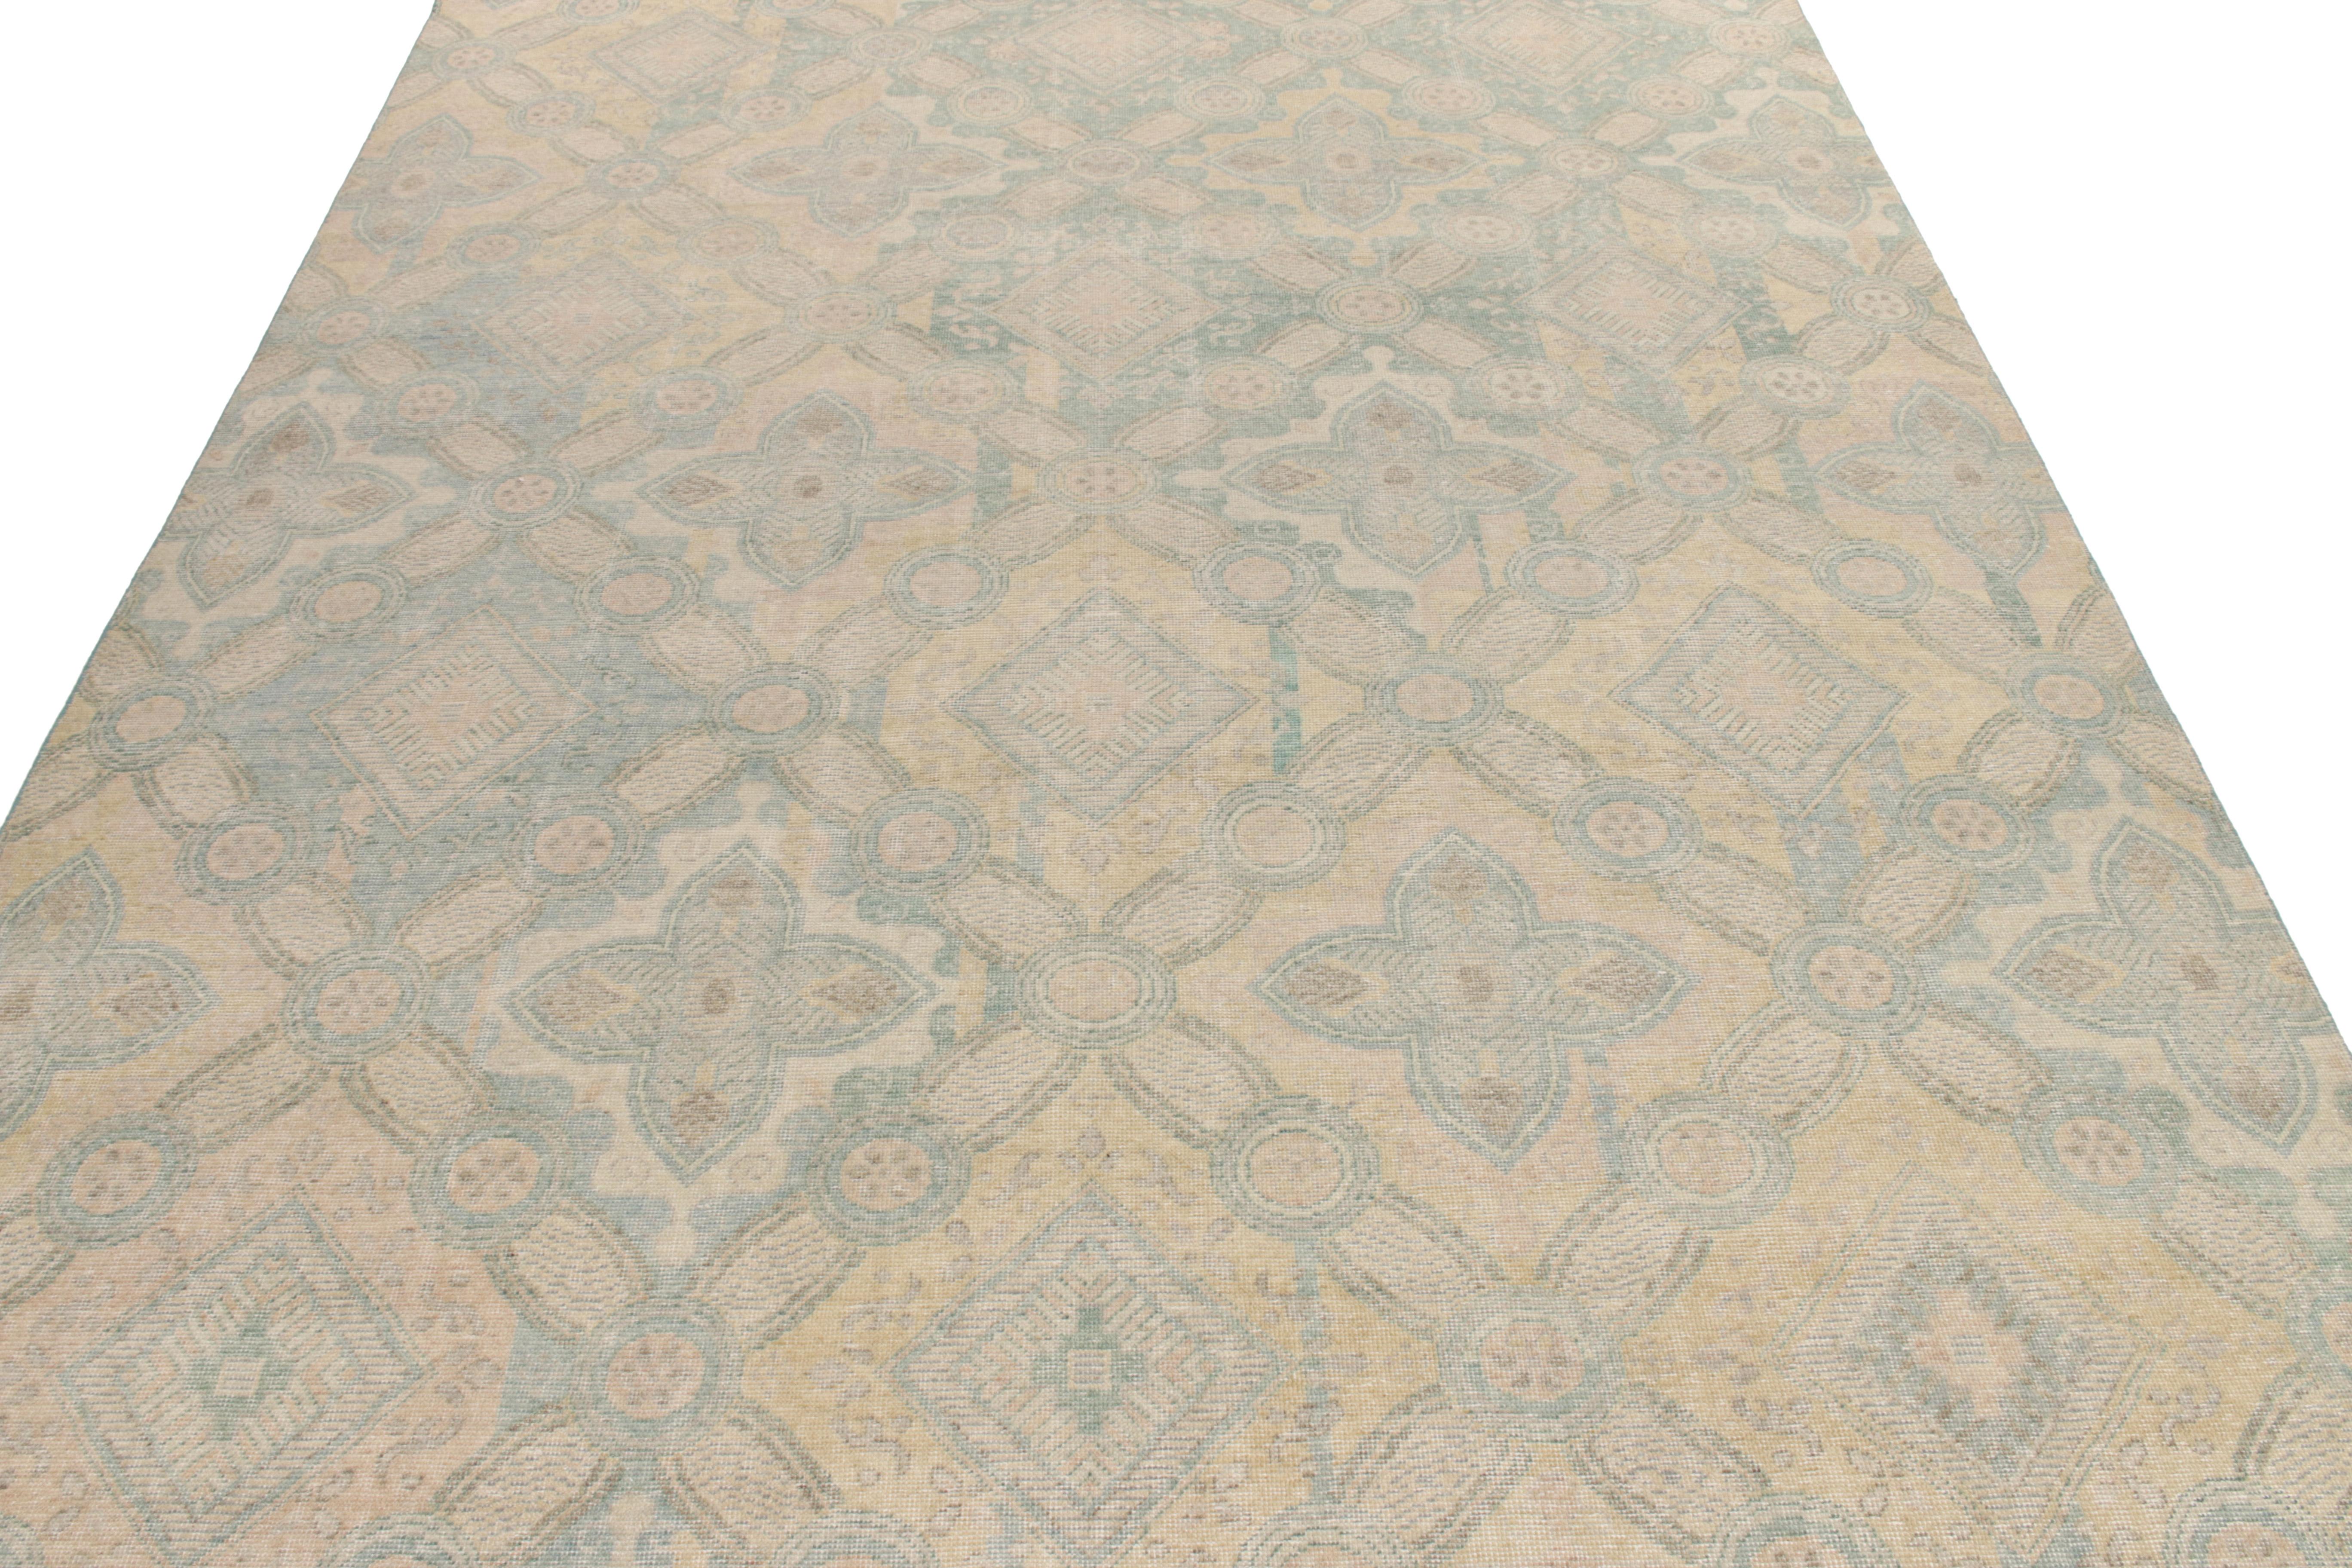 A 9x12 cream and blue floral rug, joining the Homage Collection by Rug & Kilim. Hand knotted in wool, drawing inspiration from European floral motifs akin to English and French Art Deco design sensibilities. 

Further on the Design: Varied color